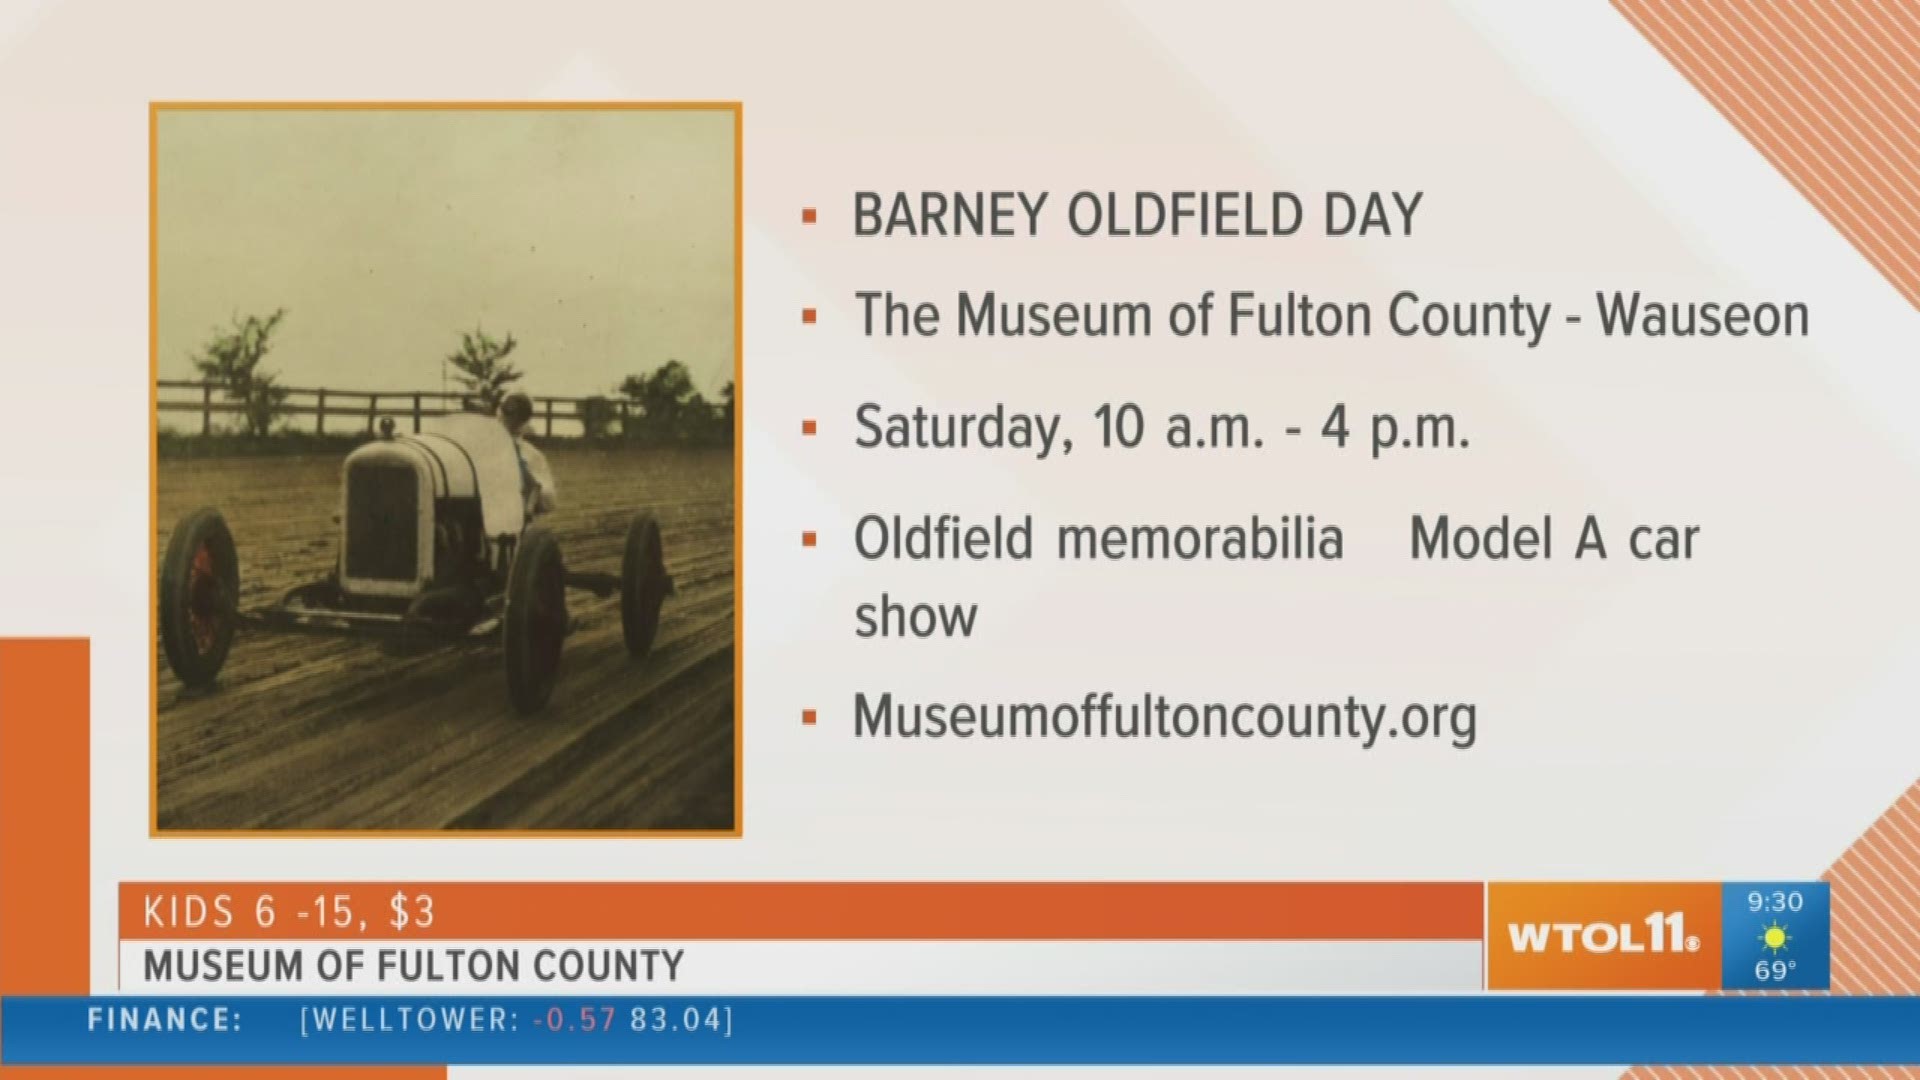 See why the Museum of Fulton County is celebrating "Speed Demon" Barney Oldfield of Wauseon this weekend.